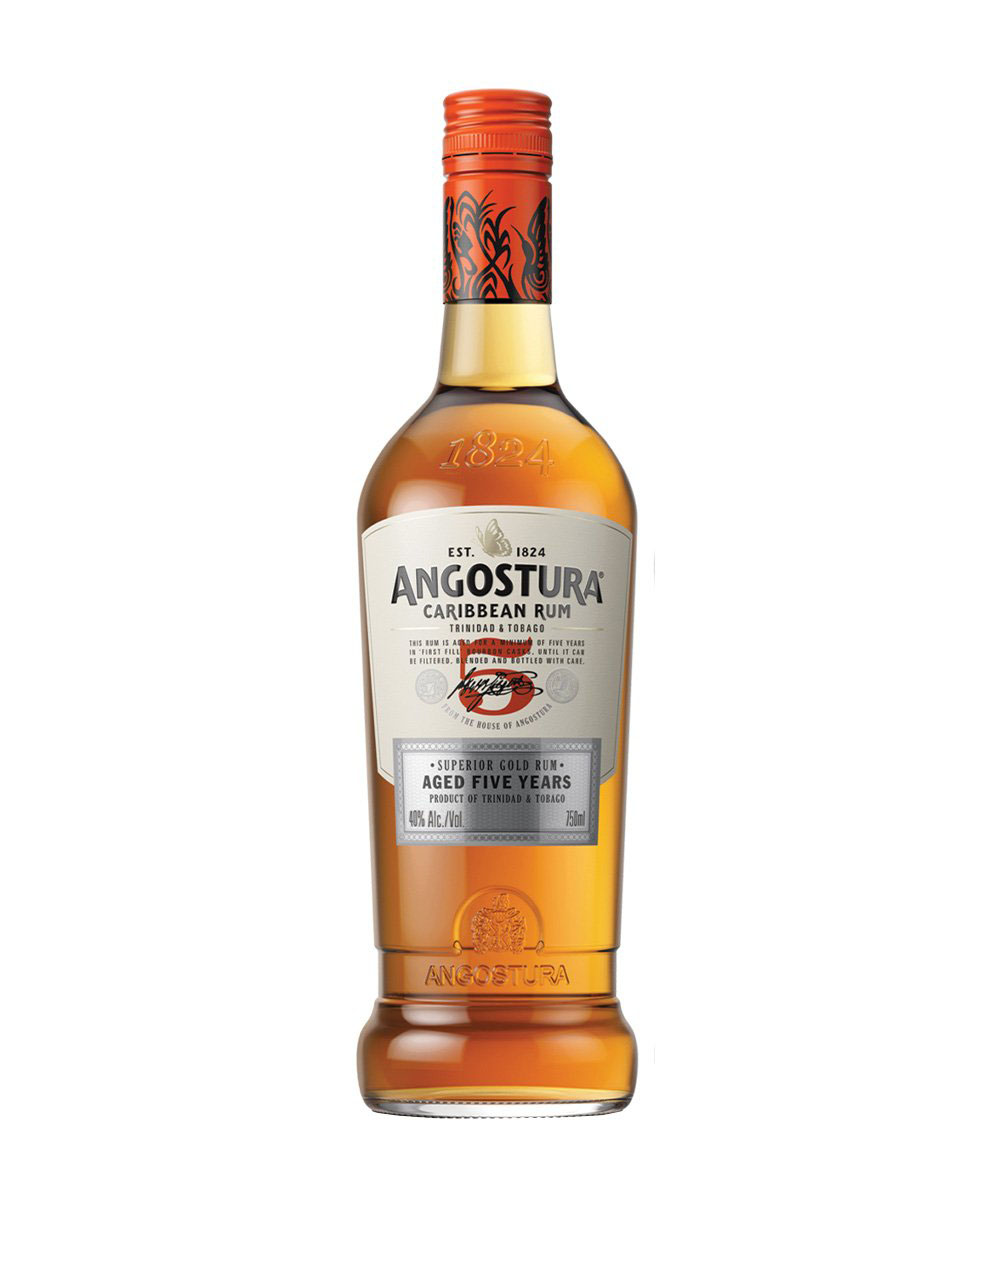 Ableforth's Rumbullion Spiced Rum